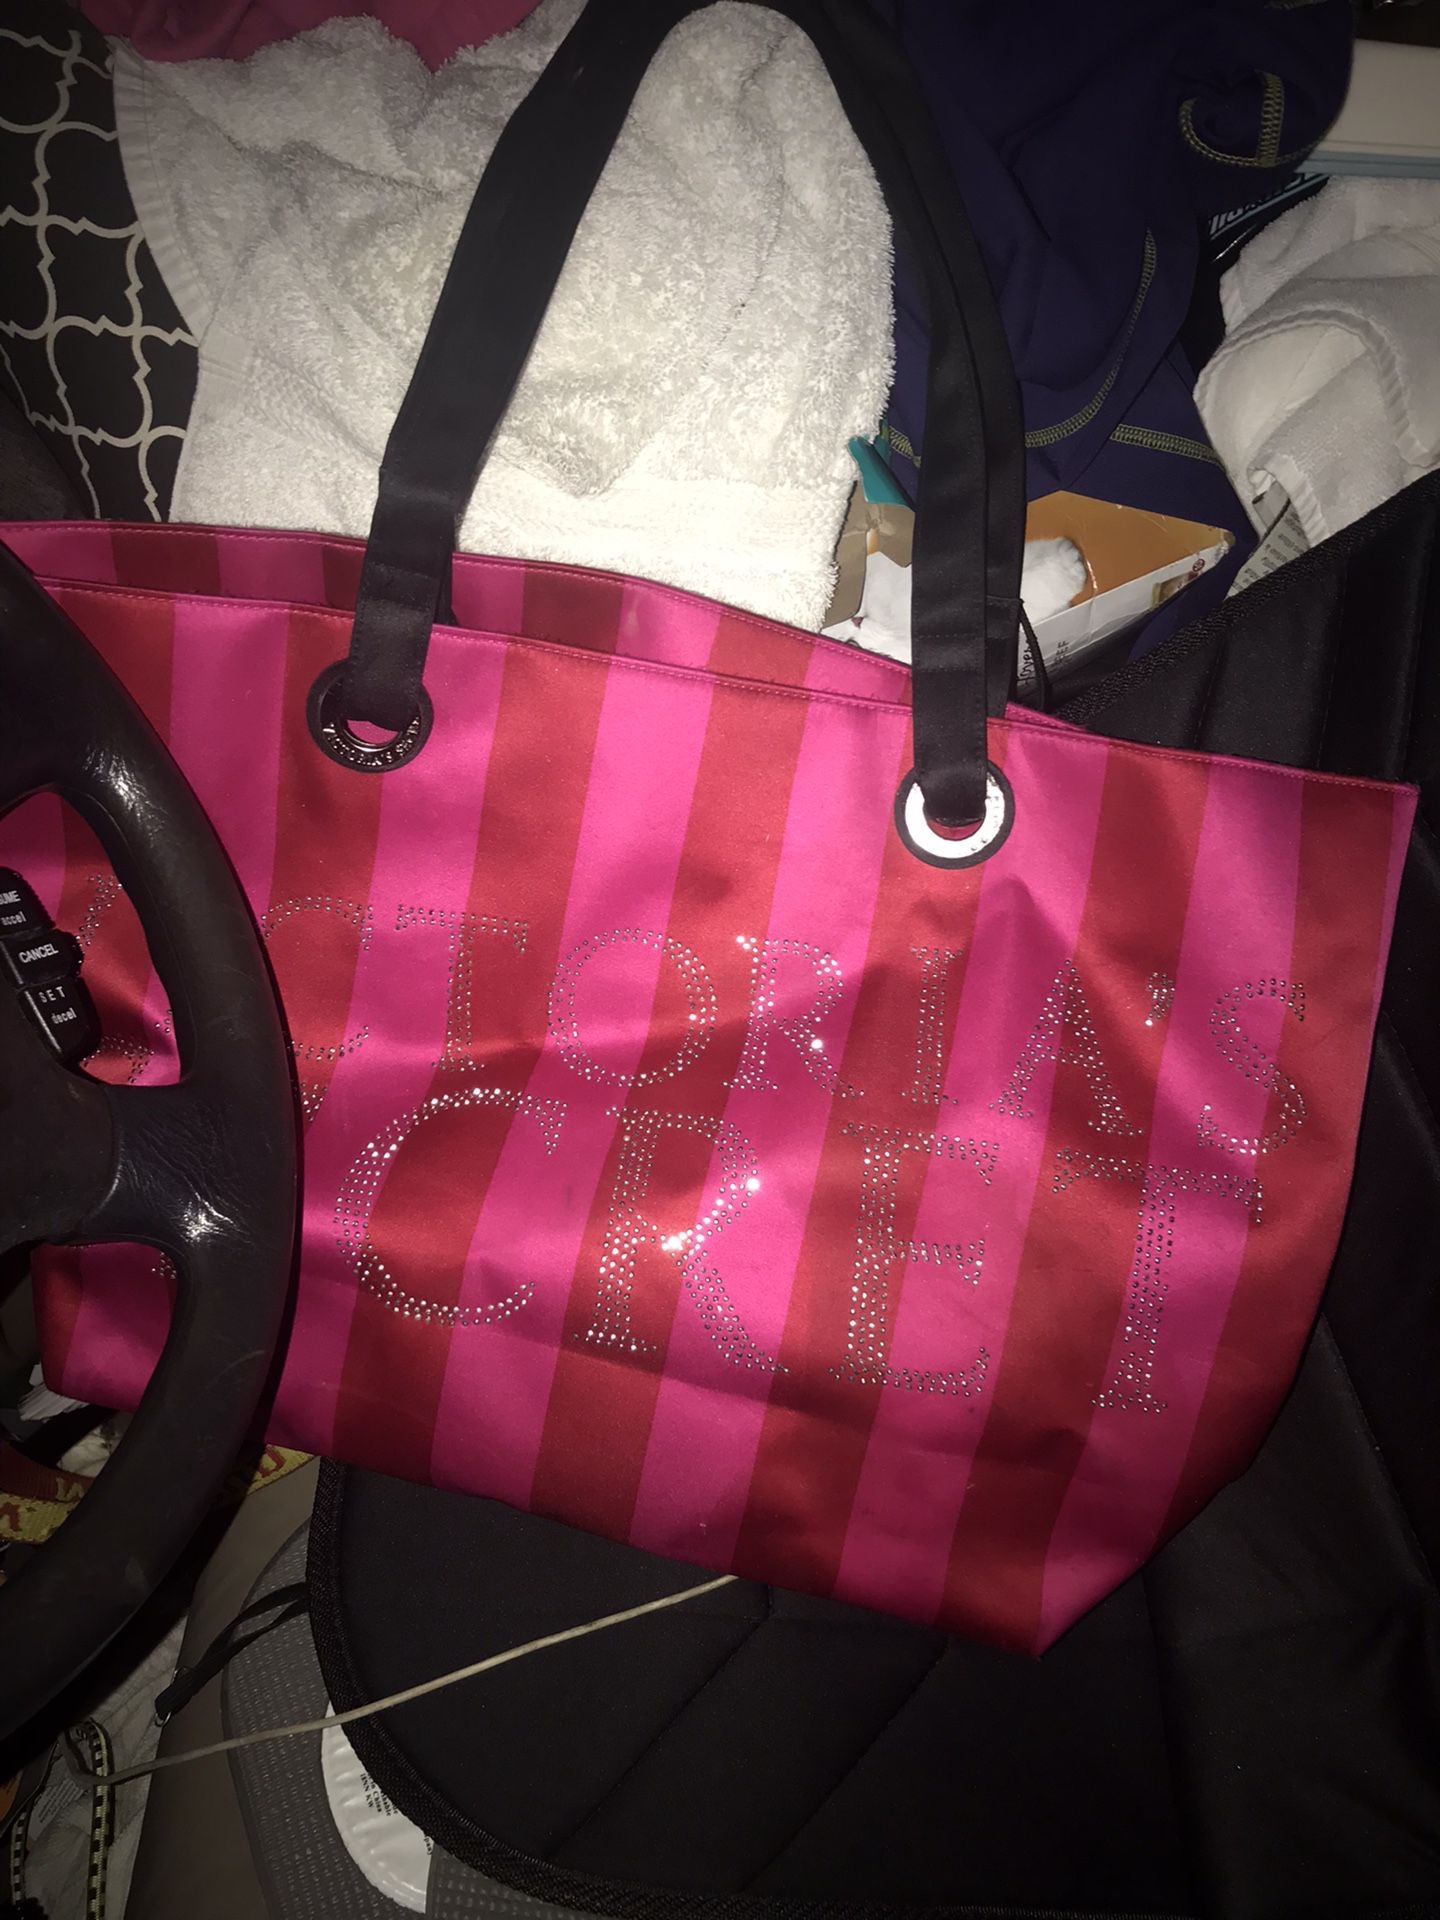 Lnew Large Victoria’s Secrets Cloth Tote Bag Only $20 Firm